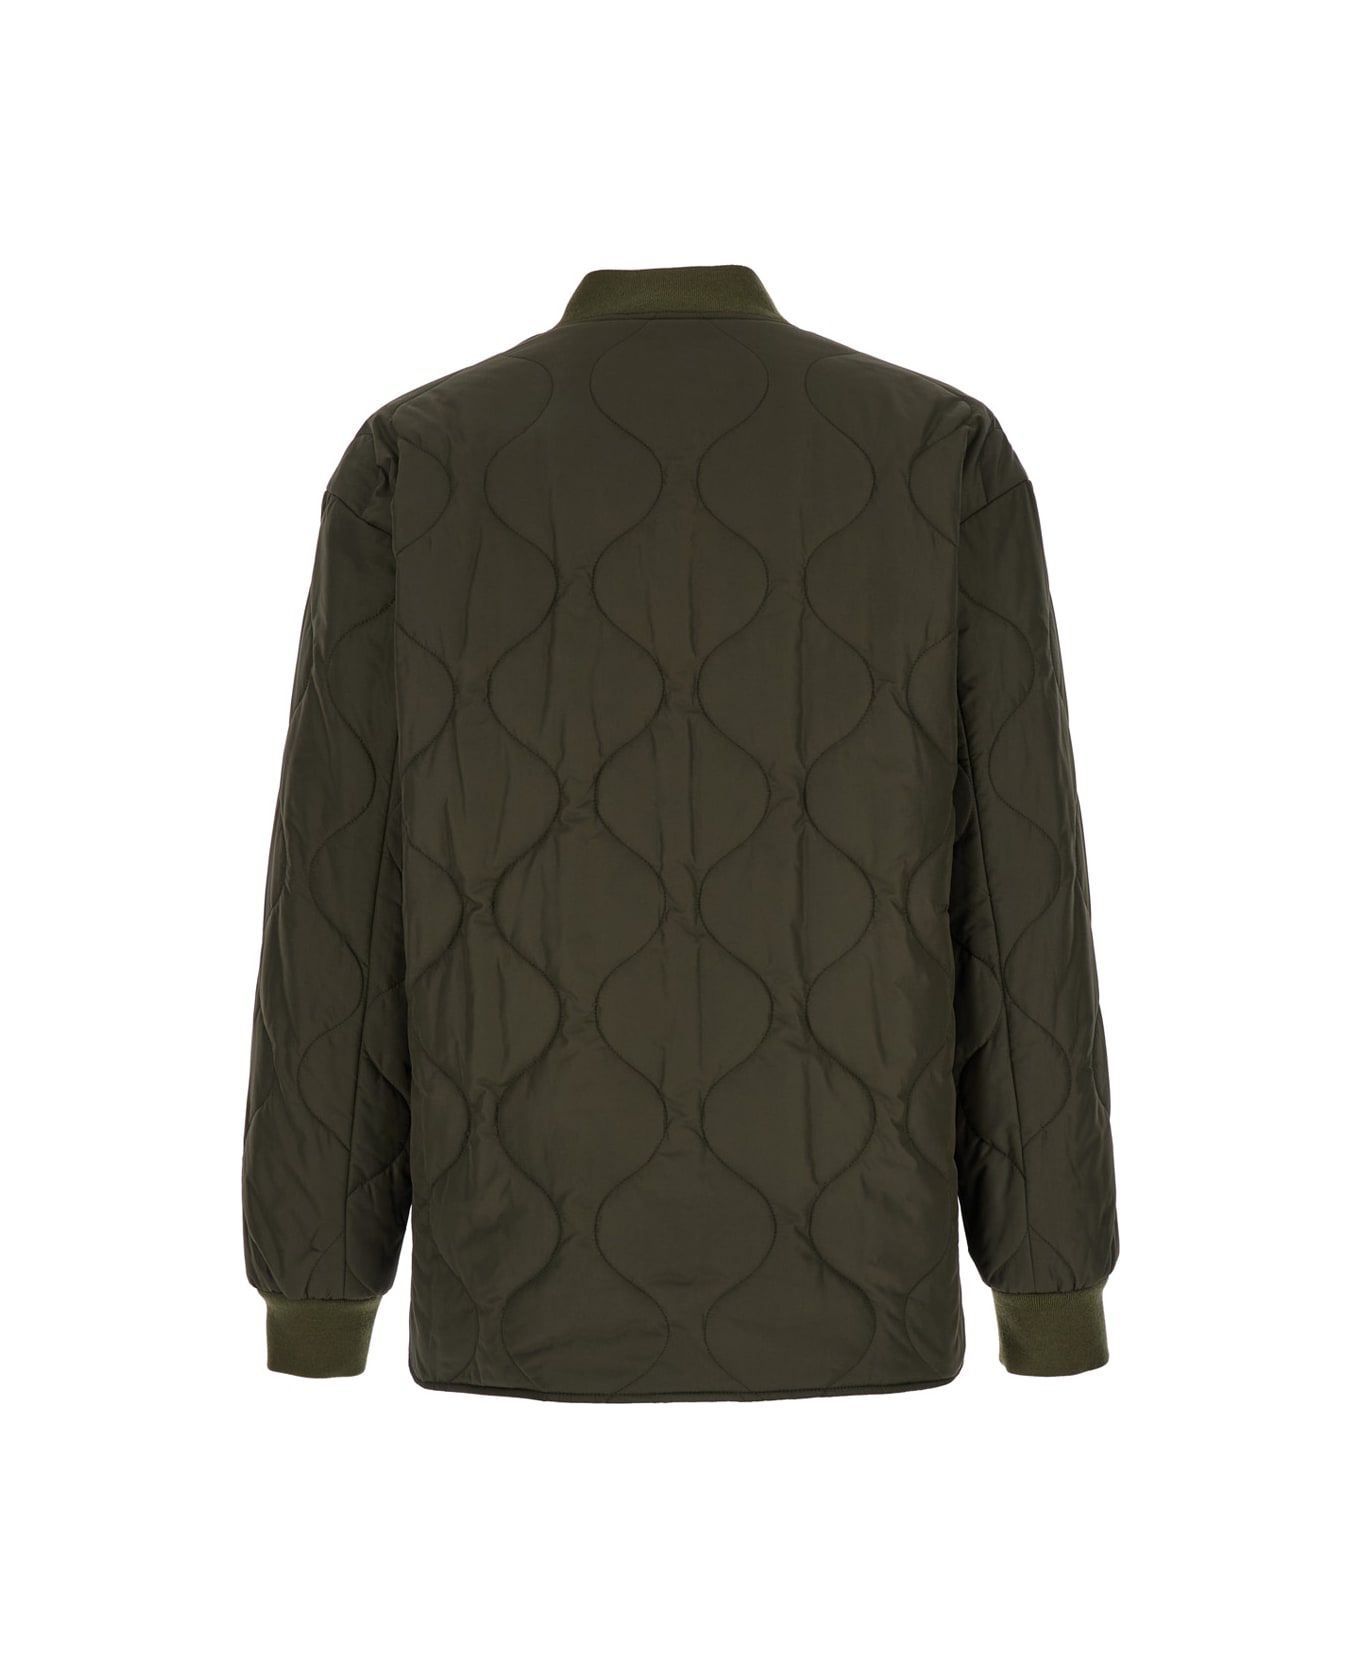 A.P.C. 'florent' Military Green Jacket With Snap Buttons In Quilted Fabric Man - Green